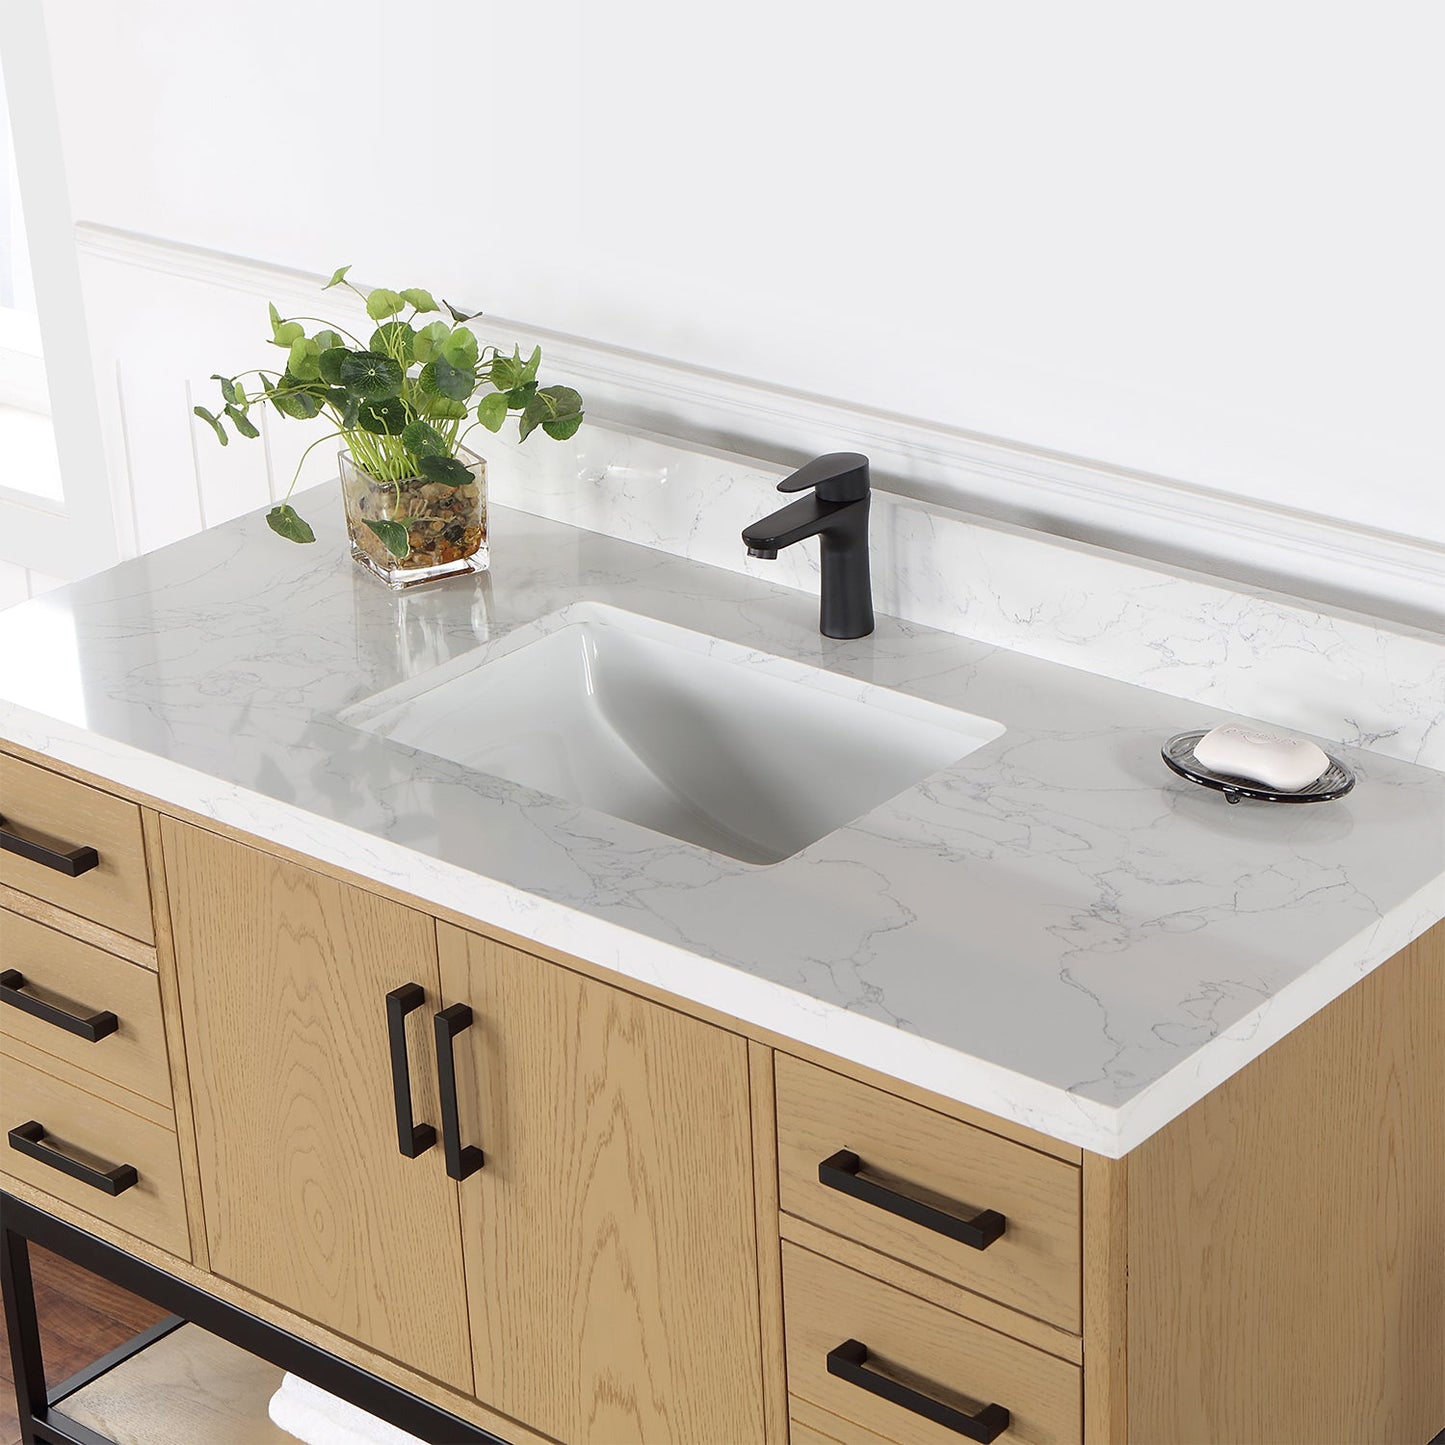 Wildy 48" Single Bathroom Vanity Set in Washed Oak with Grain White Composite Stone Countertop without Mirror